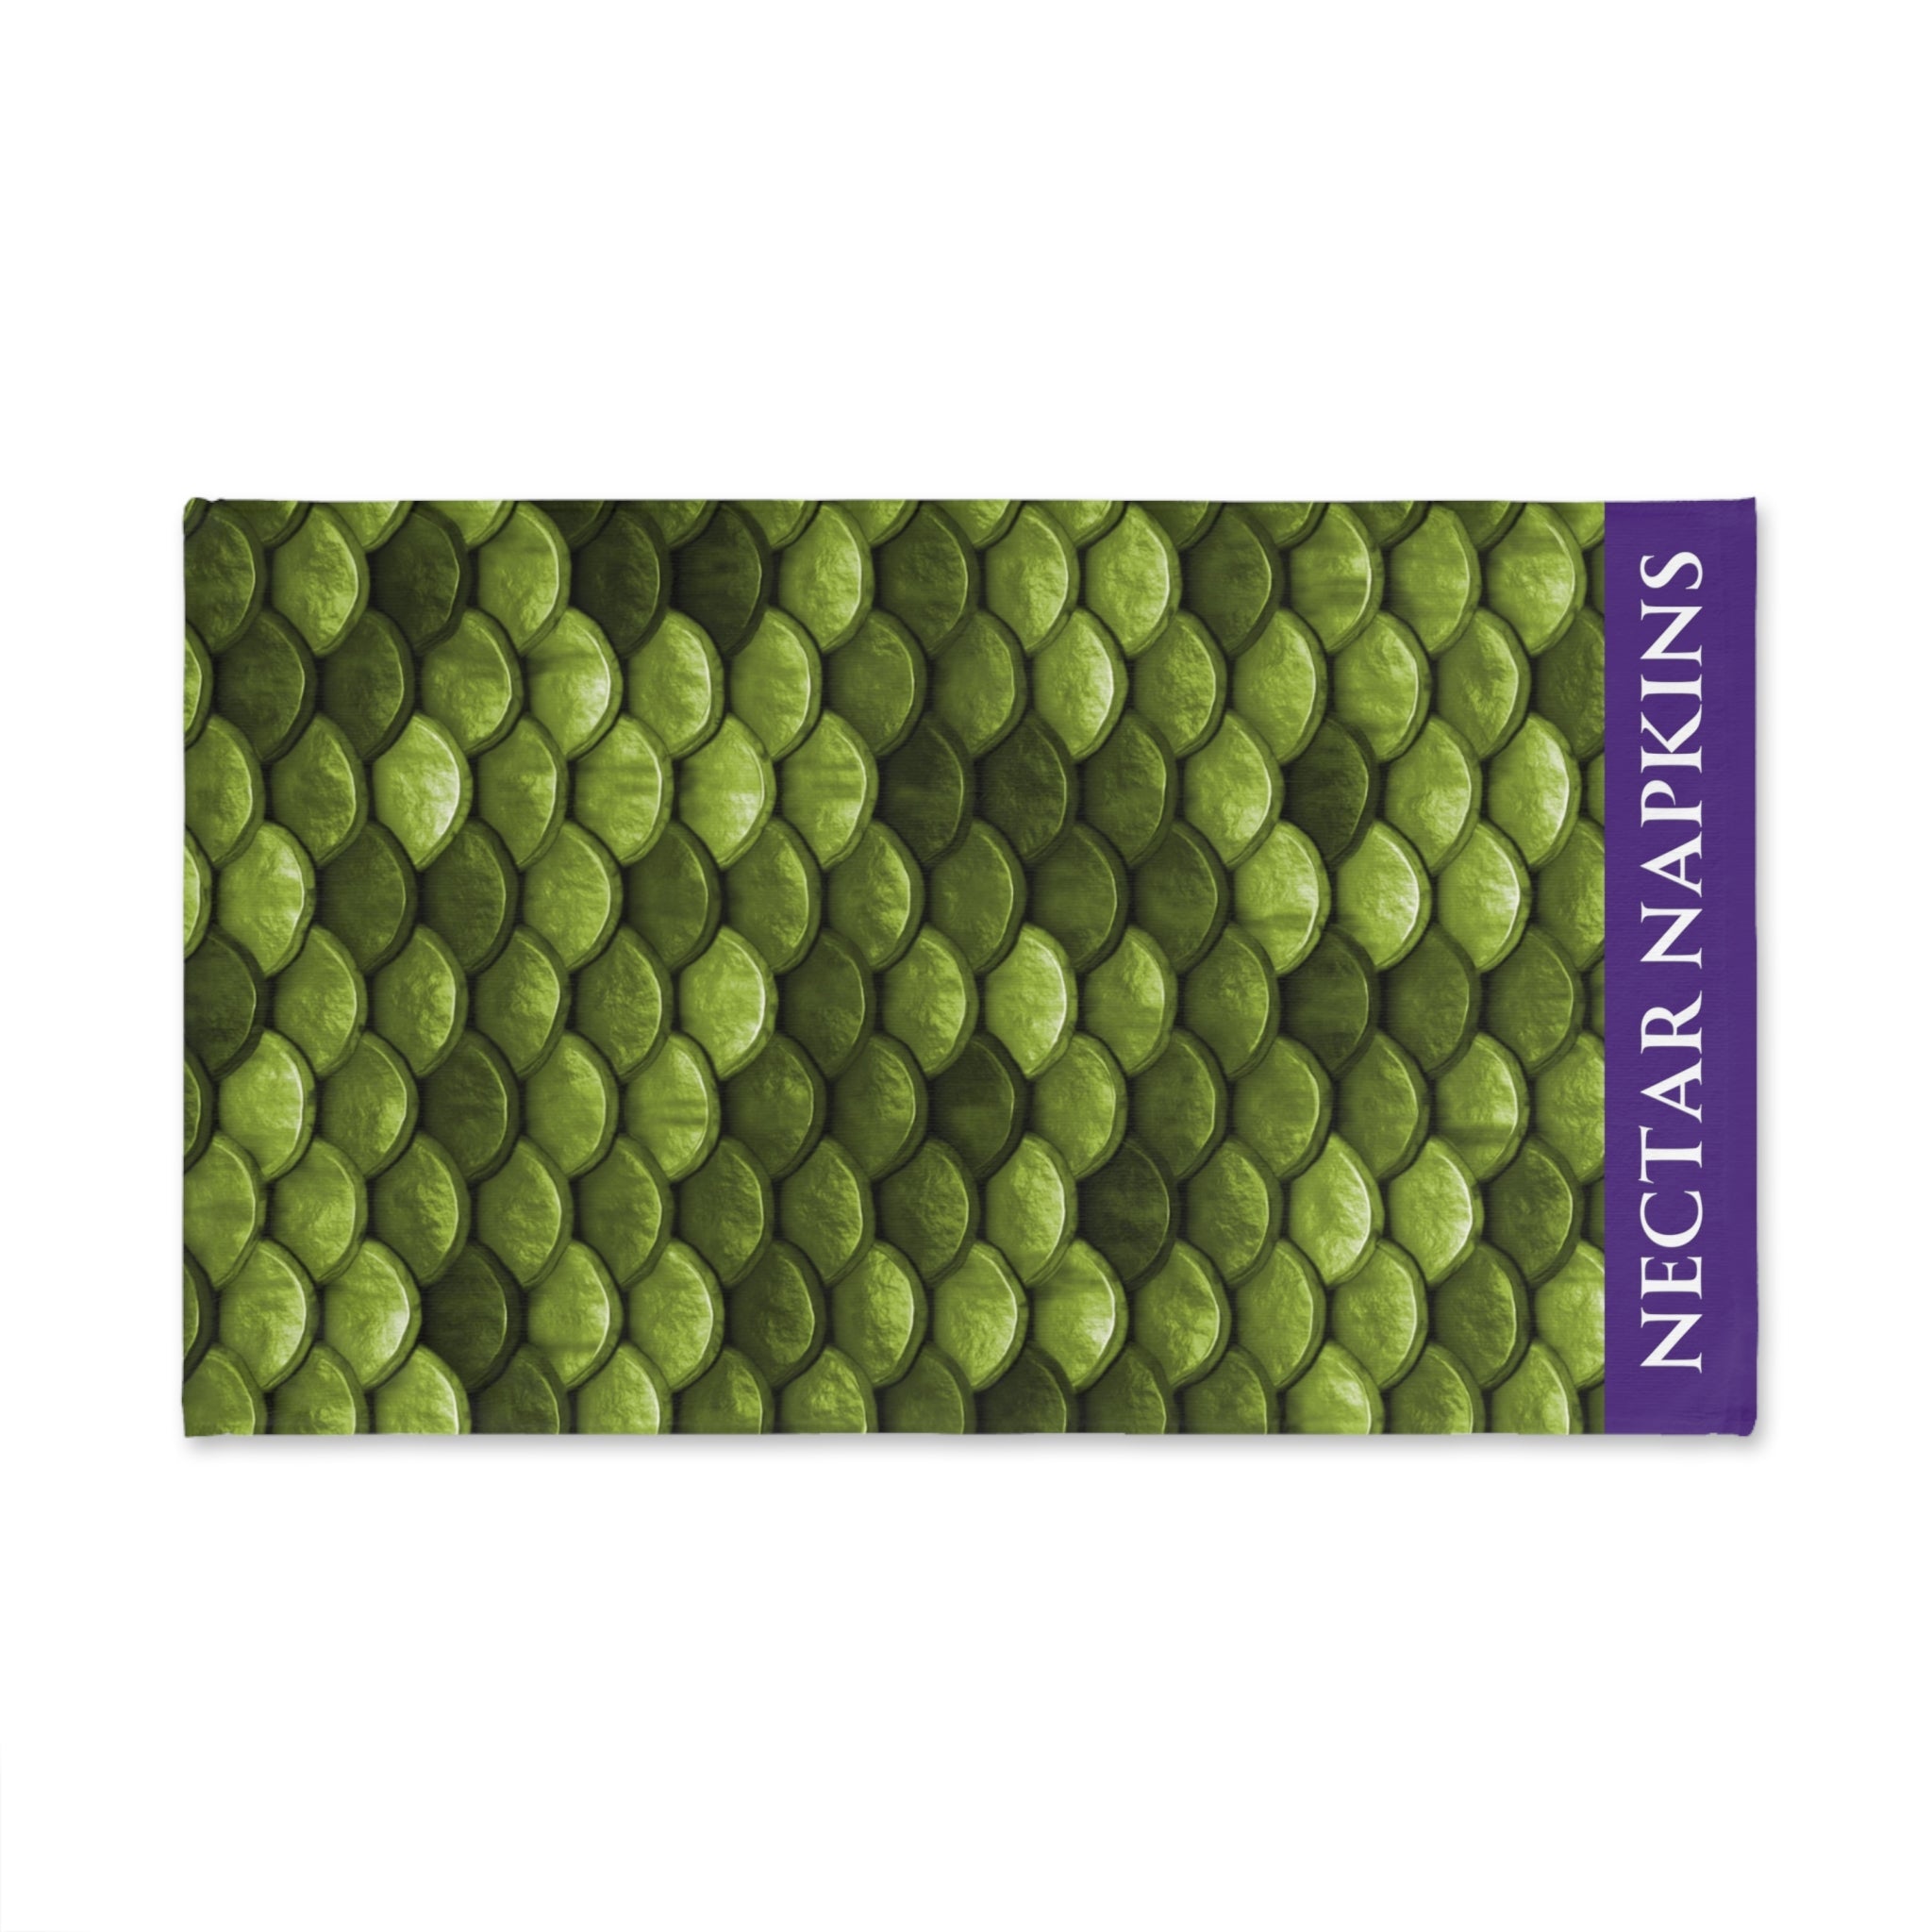 Mermaid Tail Green Purple | Funny Gifts for Men - Gifts for Him - Birthday Gifts for Men, Him, Husband, Boyfriend, New Couple Gifts, Fathers & Valentines Day Gifts, Christmas Gifts NECTAR NAPKINS